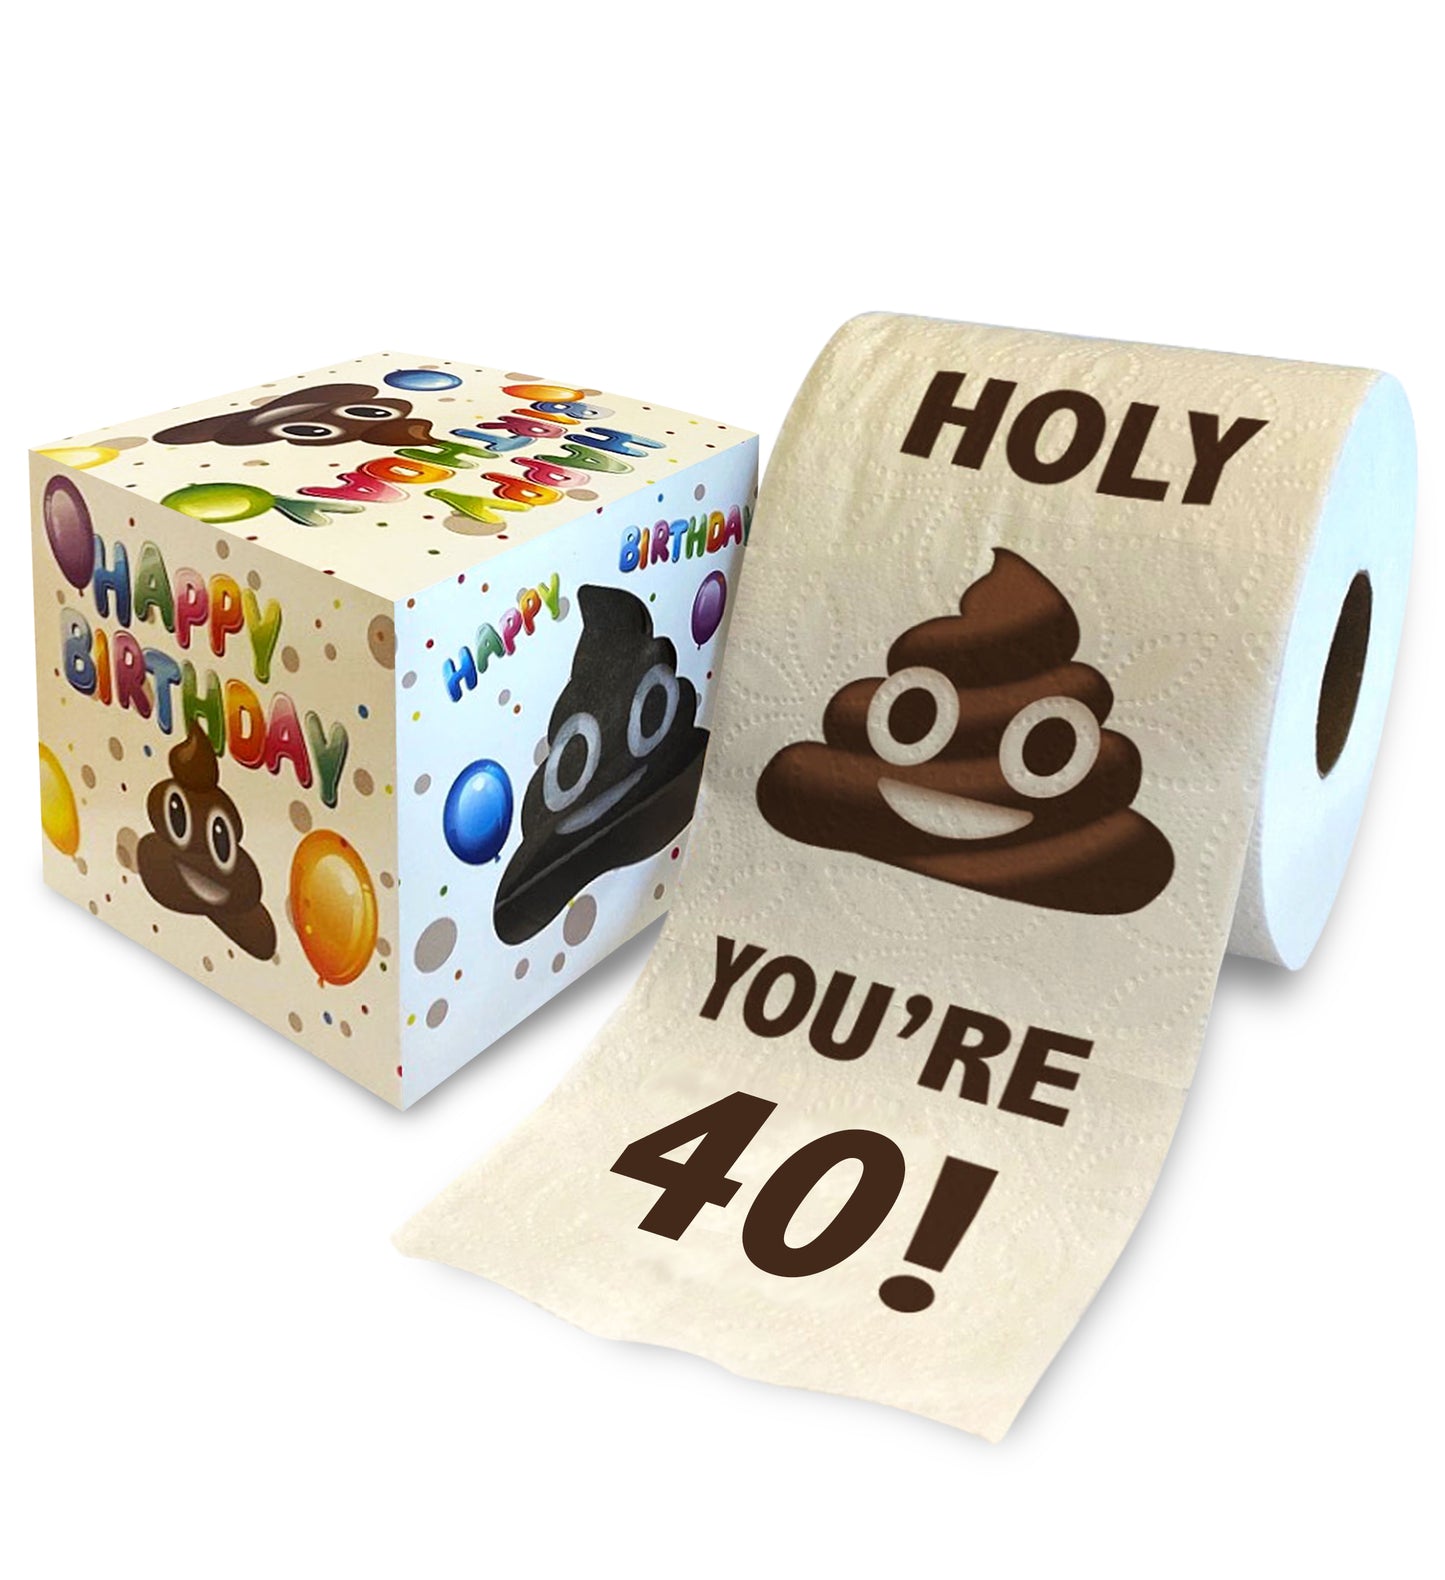 Printed TP Holy Poop You're 40 Funny Toilet Paper Roll Birthday Party Gag Gift